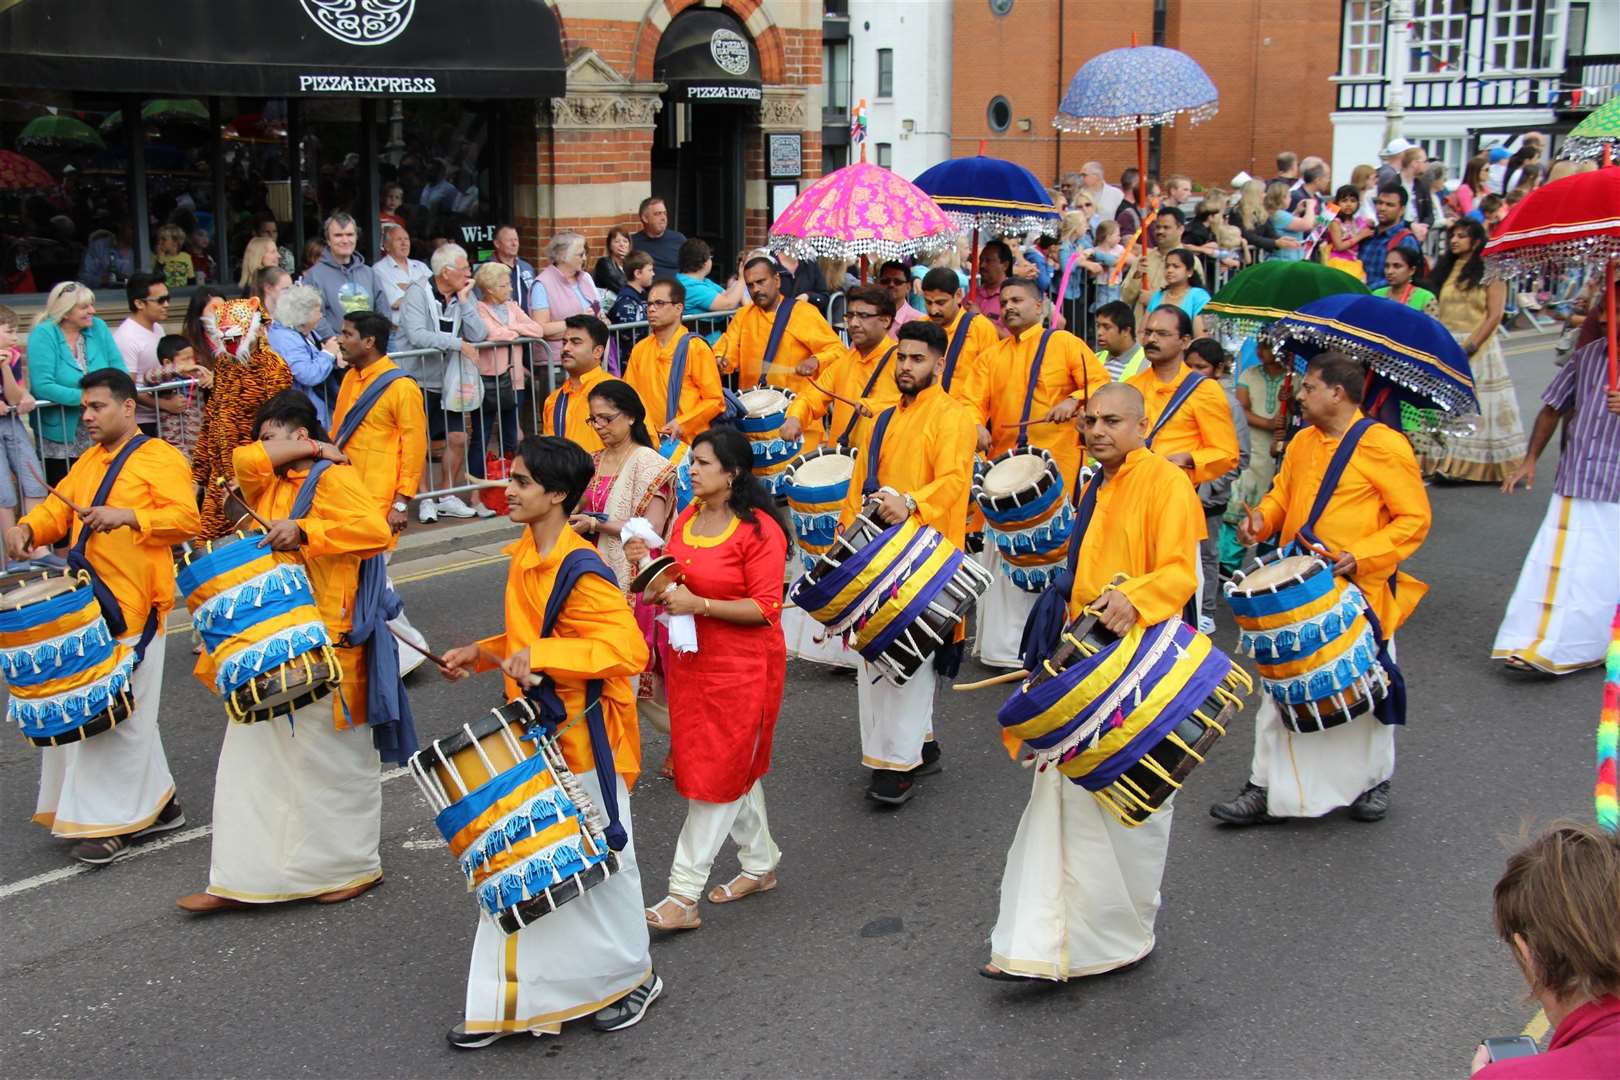 The annual event was organised by the Tonbridge Lions Club